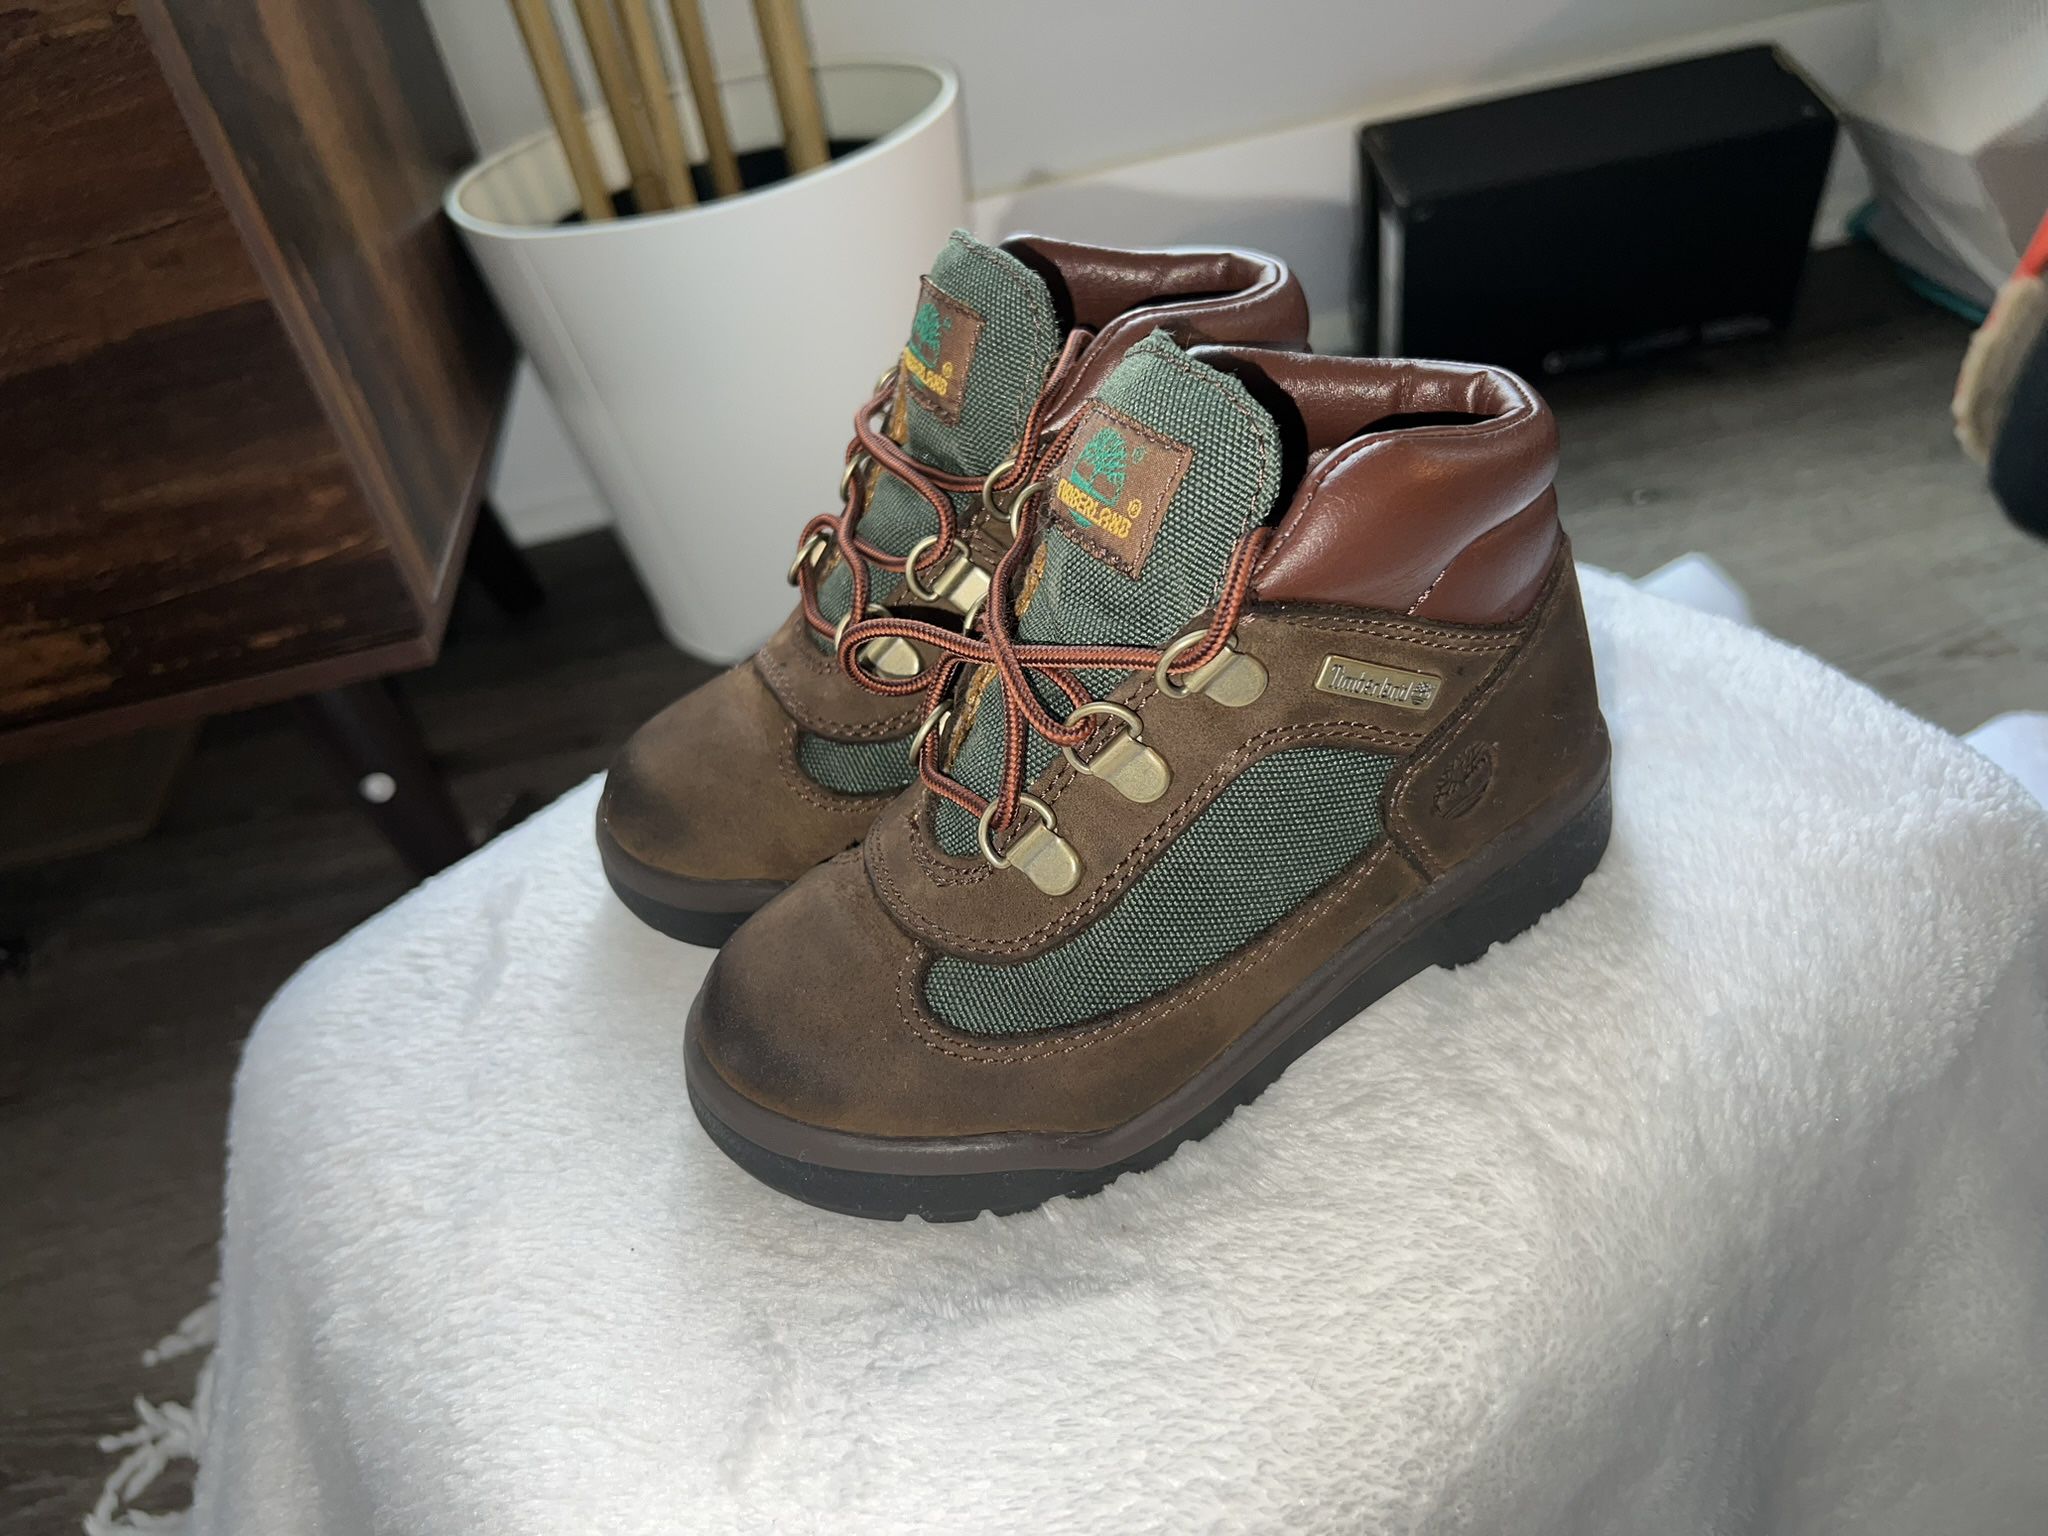 Beef & Broccoli Timbs Toddler Size 10C